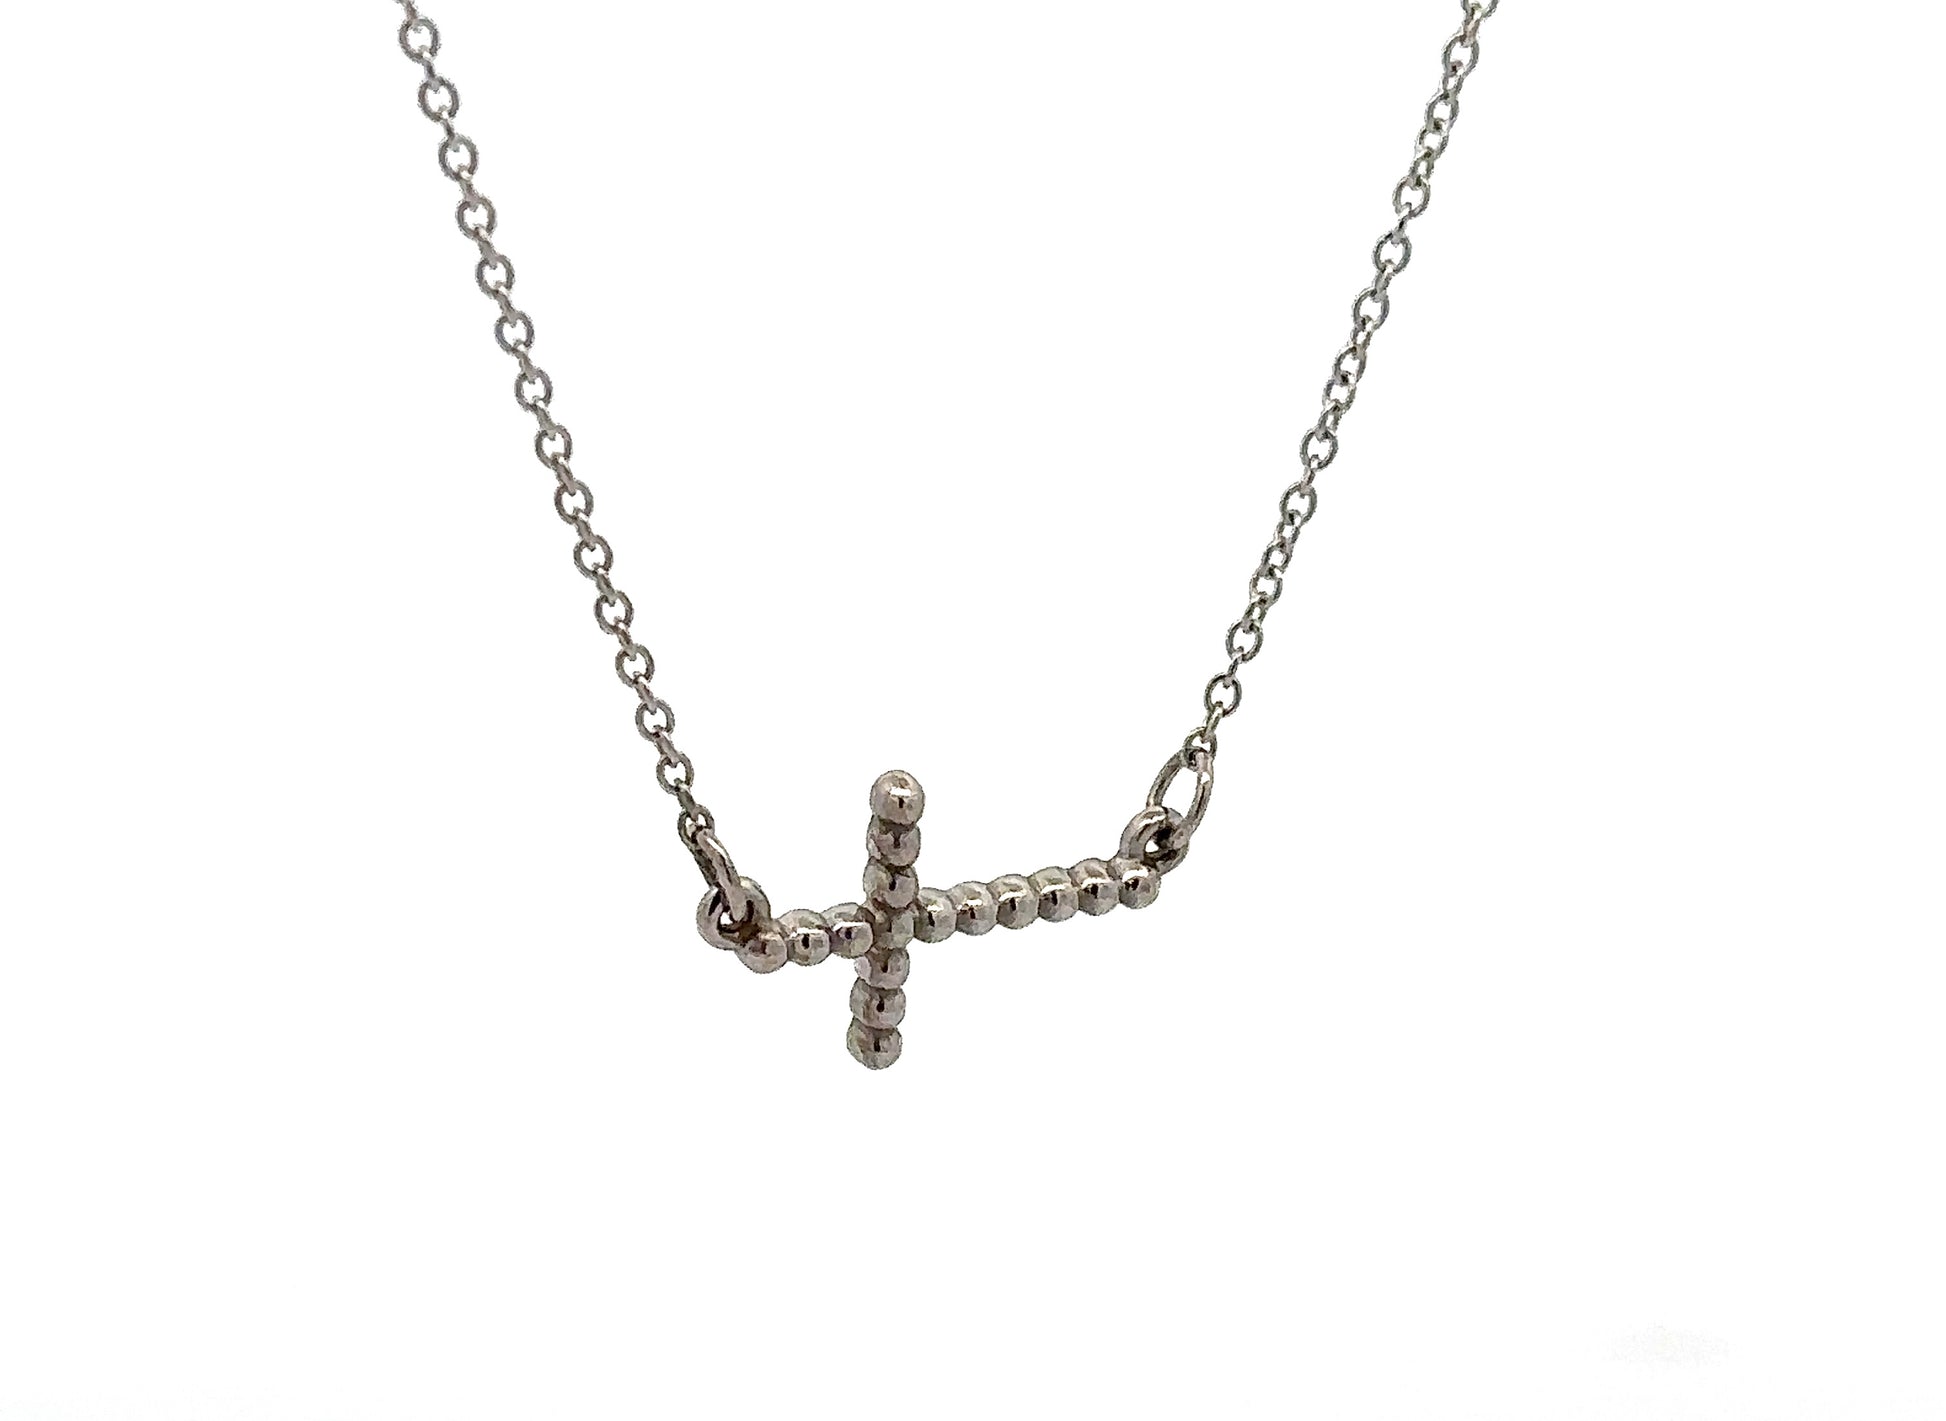 Diagonal view of white gold cross necklace